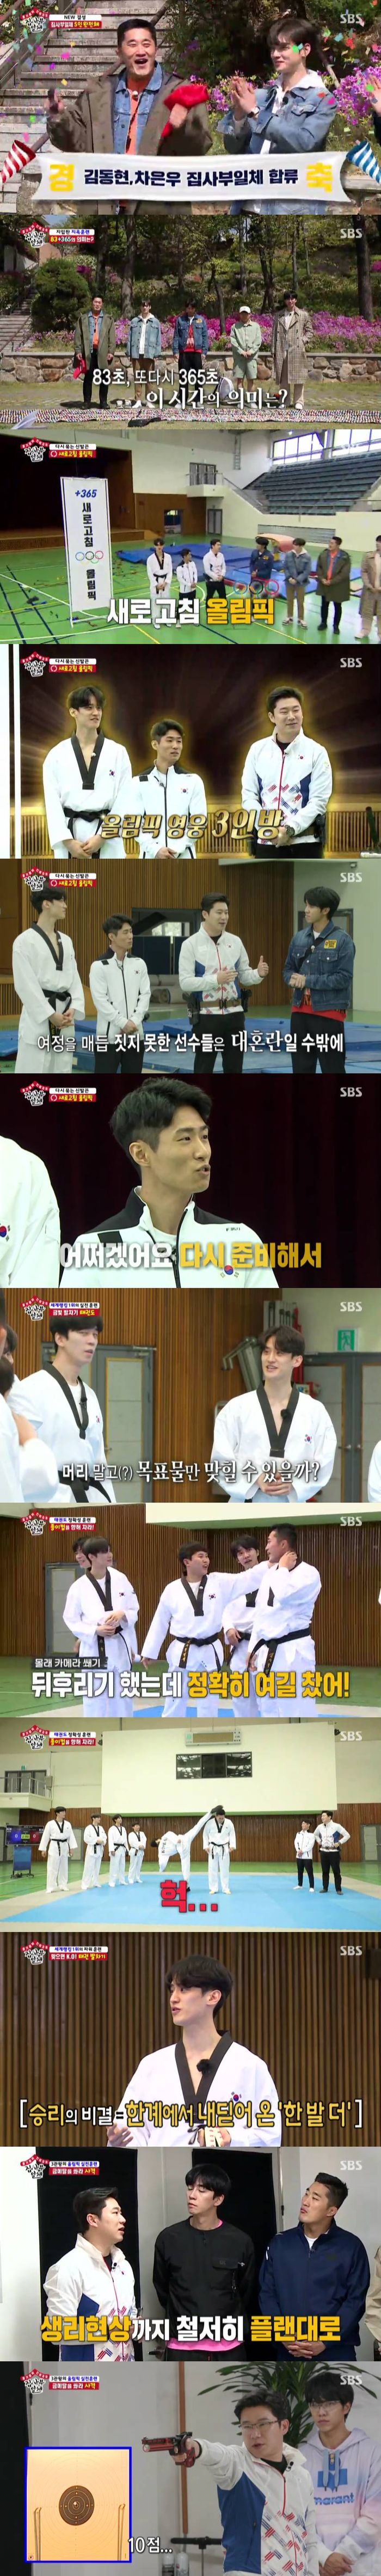 All The Butlers Lee Seung-gi and Cha Eun-woos confrontation focused attention and decorated the best one minute.According to Nielsen Korea, SBS All The Butlers, which was broadcast on the 3rd, attracted attention with 2.8% of 2049 target audience rating (based on the second part of the metropolitan area).Household ratings were 5.2%, especially Lee Seung-gi and Cha Eun-woo, with the audience rating of 6.2% per minute, the highest one minute.On the day of the show, Lee Seung-gi, Shin Sung-rok, Yang Se-hyeong, Cha Eun-woo, and Kim Dong-Hyun were shown spending the day with Olympic legends Yang Hak-Seon, Lee Dae-hoon and Jin Jong-oh.First, Kim Dong-Hyun appeared with Cha Eun-woo with an assistant dress and surprised the members.Cha Eun-woo said, As of today, Im joining my brothers and members of All The Butlers; Ill do my best; Ill report it to you.Kim Dong-Hyun said, This is why I will be able to complete the ceremony for one person including Cha Eun-woo today. Lee Seung-gi said, Wait a minute, what happened to Cha Eun-woo and one other person?Kim Dong-Hyun then told the mission that he had to run on the chiropractic plate for 83 seconds to meet the master. The members were distressed and succeeded in the mission safely.However, at this time, the number 365 appeared on the monitor screen again, and the production team delivered an additional mission saying, We have to do it again for 365 seconds.The members refused the mission, saying, If we had 448 seconds at a time, we would have done it quickly, but I thought it was over, but I was out of strength because I thought it was over. The production team said, It was painful to think about it when 365 seconds came out again after suffering and patience.However, todays master is those who have to endure this pain and patience for 365 days. The master of the day was Olympic hero gymnast Yang Hak-Seon, Taekwondo Lee Dae-hoon, and shooting Jin Jong-oh.The theme to be with the three masters was the New Fixed Olympic Games.As for the Olympics being postponed for a year, Jin Jong-oh said, Everyone prepared to adjust their condition, but it was re-refresh because it was postponed.I thought it was the last time, but if I get more than a year, I am worried that I have to manage again. Yang Hak-Seon and Lee Dae-hoon also talked about empty feelings and worrying minds.But Yang Hak-Seon also said, What do you do? Lets get ready again.The members decided to take a limited class lesson from the masters. First, Master Lee Dae-hoons Taekwondo lecture began.Prior to the full-scale class, Lee Dae-hoon was impressed by the ability to kick over the members heads.The members then suggested, Lets go back this time, and Lee Dae-hoon decided to put a paper cup on Kim Dong-Hyuns head.At this time, Yang Se-hyeong hit Kim Dong-Hyuns back with his shoes to tease Kim Dong-Hyun, and the rest of the members laughed for him.But in the actual kicking demonstration that followed, Lee Dae-hoon accidentally hit Kim Dong-Hyun in the back, and Kim Dong-Hyun shouted You too and made everyone laugh.Meanwhile, Lee Dae-hoon cited one more foot as the key to victory: Taekwondo is the key to keeping accurate RBIs, power and speed.So I need the strength to maintain the intensity, he said. So I always think that I am only one more foot when I Exercise, and I keep my physical strength by repeating it many times. He said.The next place for the members who had been trained by Lee Dae-hoon was Master Jin Jong-ohs shooting range.He revealed that he lived as he planned, revealing his actual training schedule, and even focused on seeing bowel movements at a fixed time to solve the physiological phenomenon.(Shot) has a lot of static, so if you dont clear the chapter, its a hindrance. Im trying to watch because of my promise to myself. Since then, Jin Jong-oh has handed the members a 3kg dumbbell, saying, Lets make sure from the basics of shooting.He said, I will give the best person to hold the blindfold and give him the opportunity to shoot my game gun.The members said, I can last 30 minutes, I will sleep a little, but it was not easy to hold a 3kg dumbbell with one hand.Following Shin Sung-rok, Yang Se-hyeong and Kim Dong-Hyun were eliminated in the order of the one-on-one confrontation between Lee Seung-gi and Cha Eun-woo.The pair held on well together for quite a long time, but the last Cha Eun-woos elbow was bent, leaving Lee Seung-gi to win.On this day, Lee Seung-gi and Cha Eun-woos pride showdown raised their curiosity about the result and won the best one minute with 6.2% per minute.